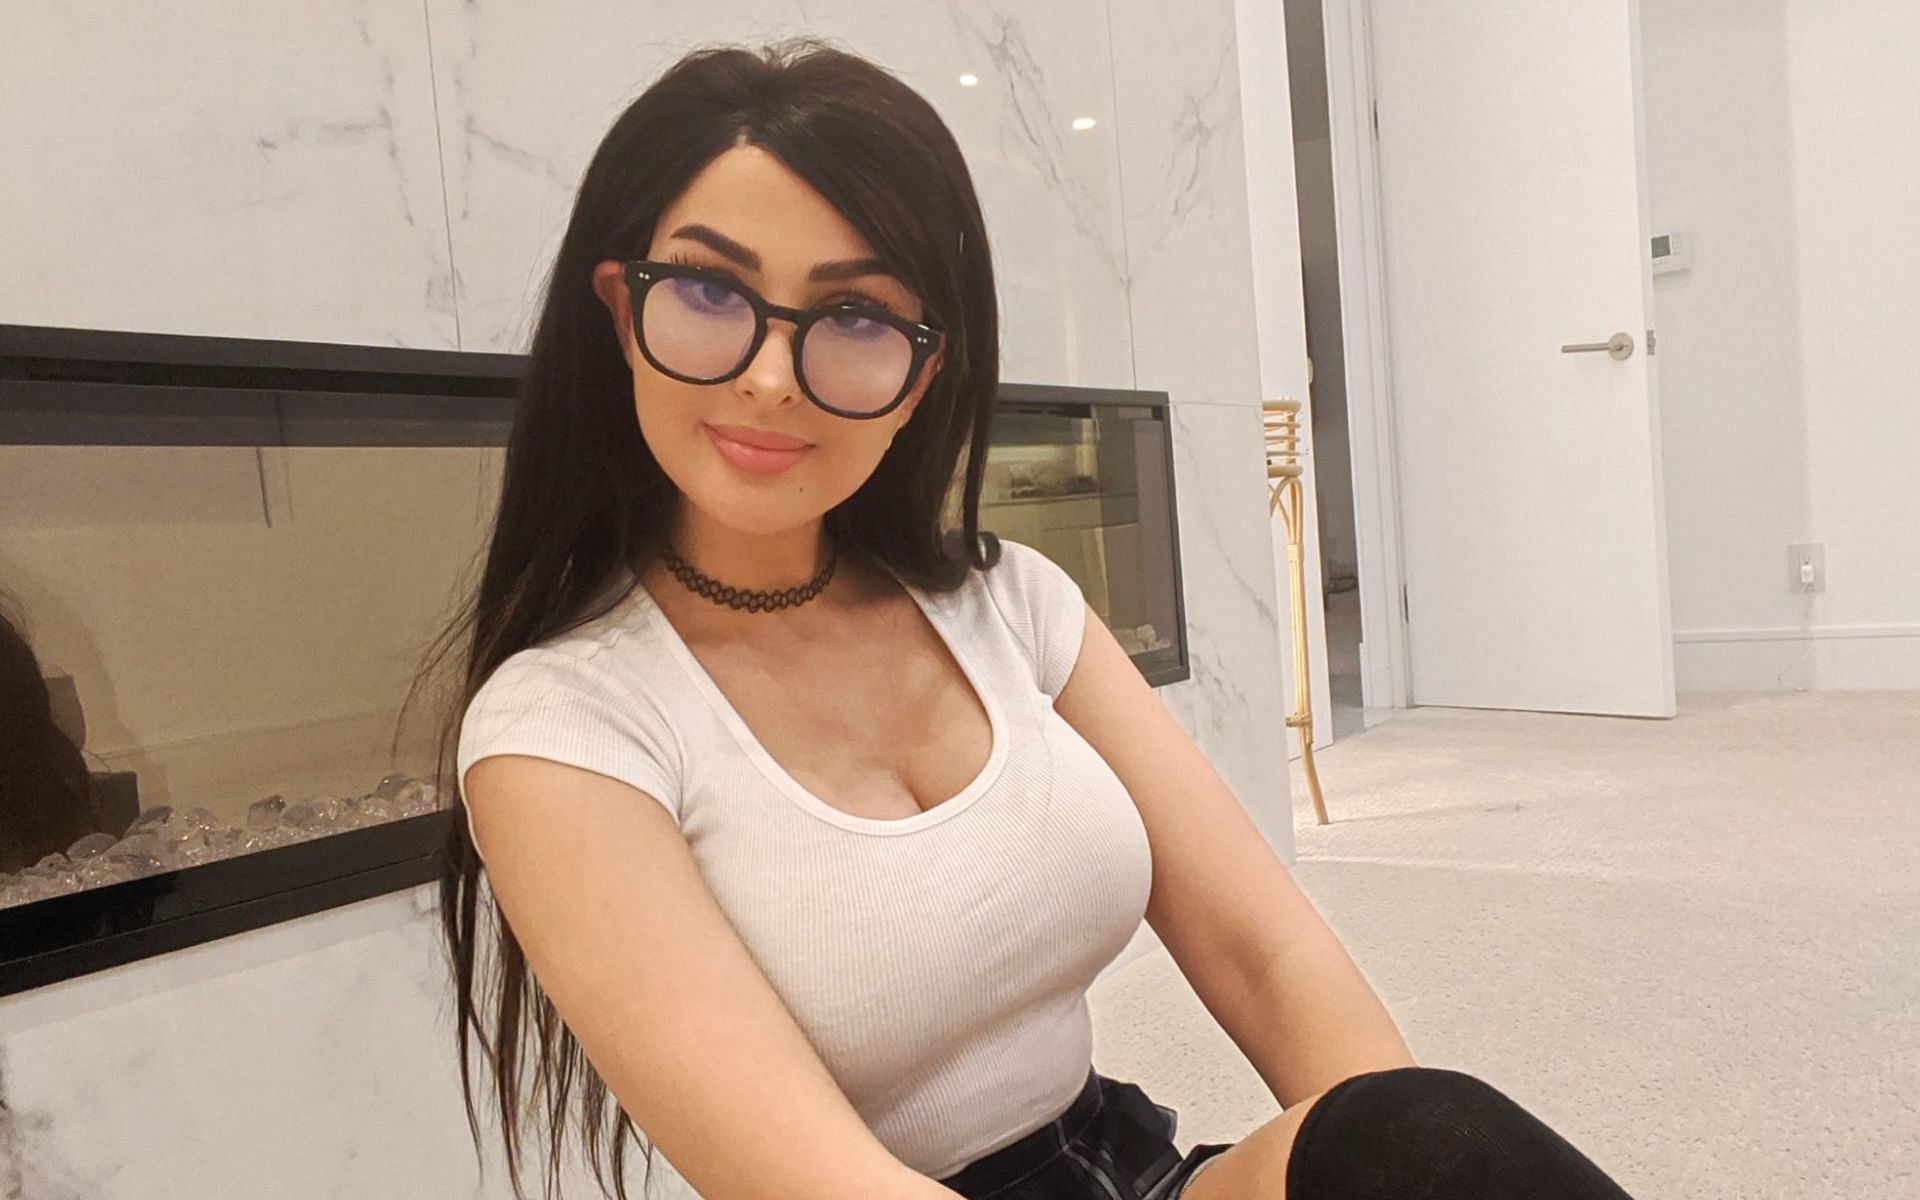 Videos have been extremely difficult to film - SSSniperwolf announces that  she is stepping back amid heated controversy